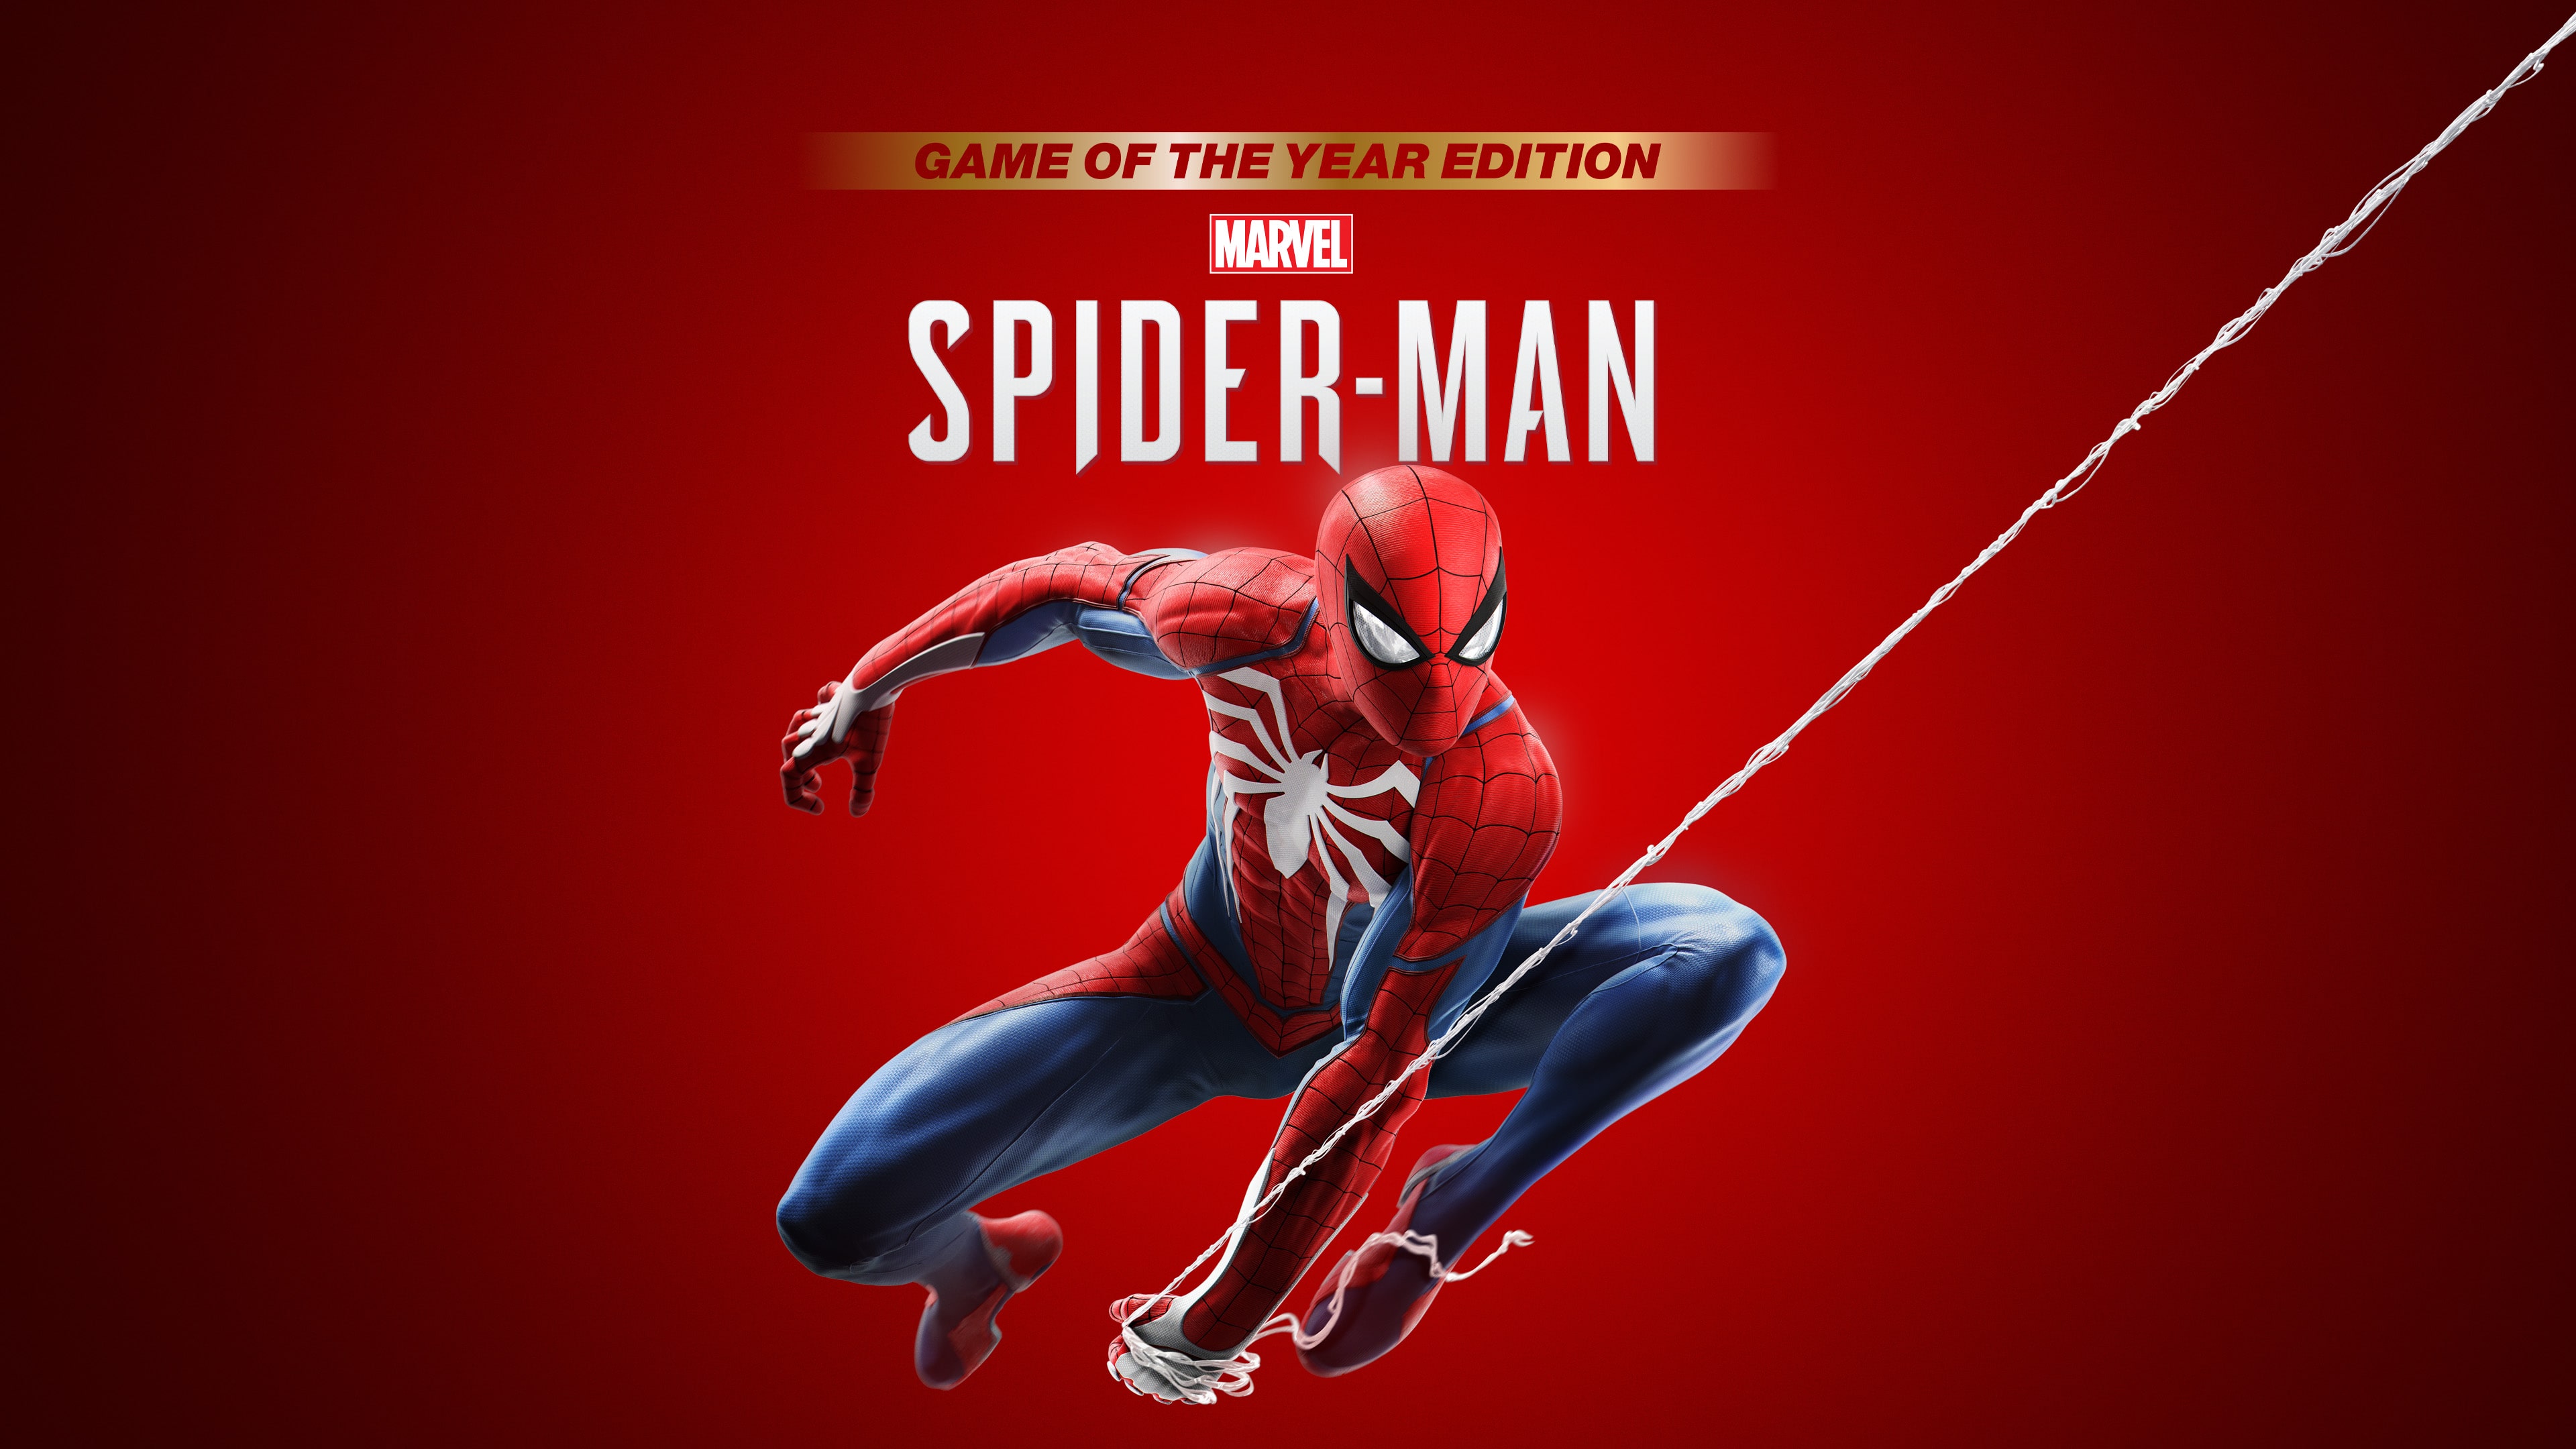 Marvel's Spider-Man Game Of The Year Edition (韓文, 英文, 繁體中文)